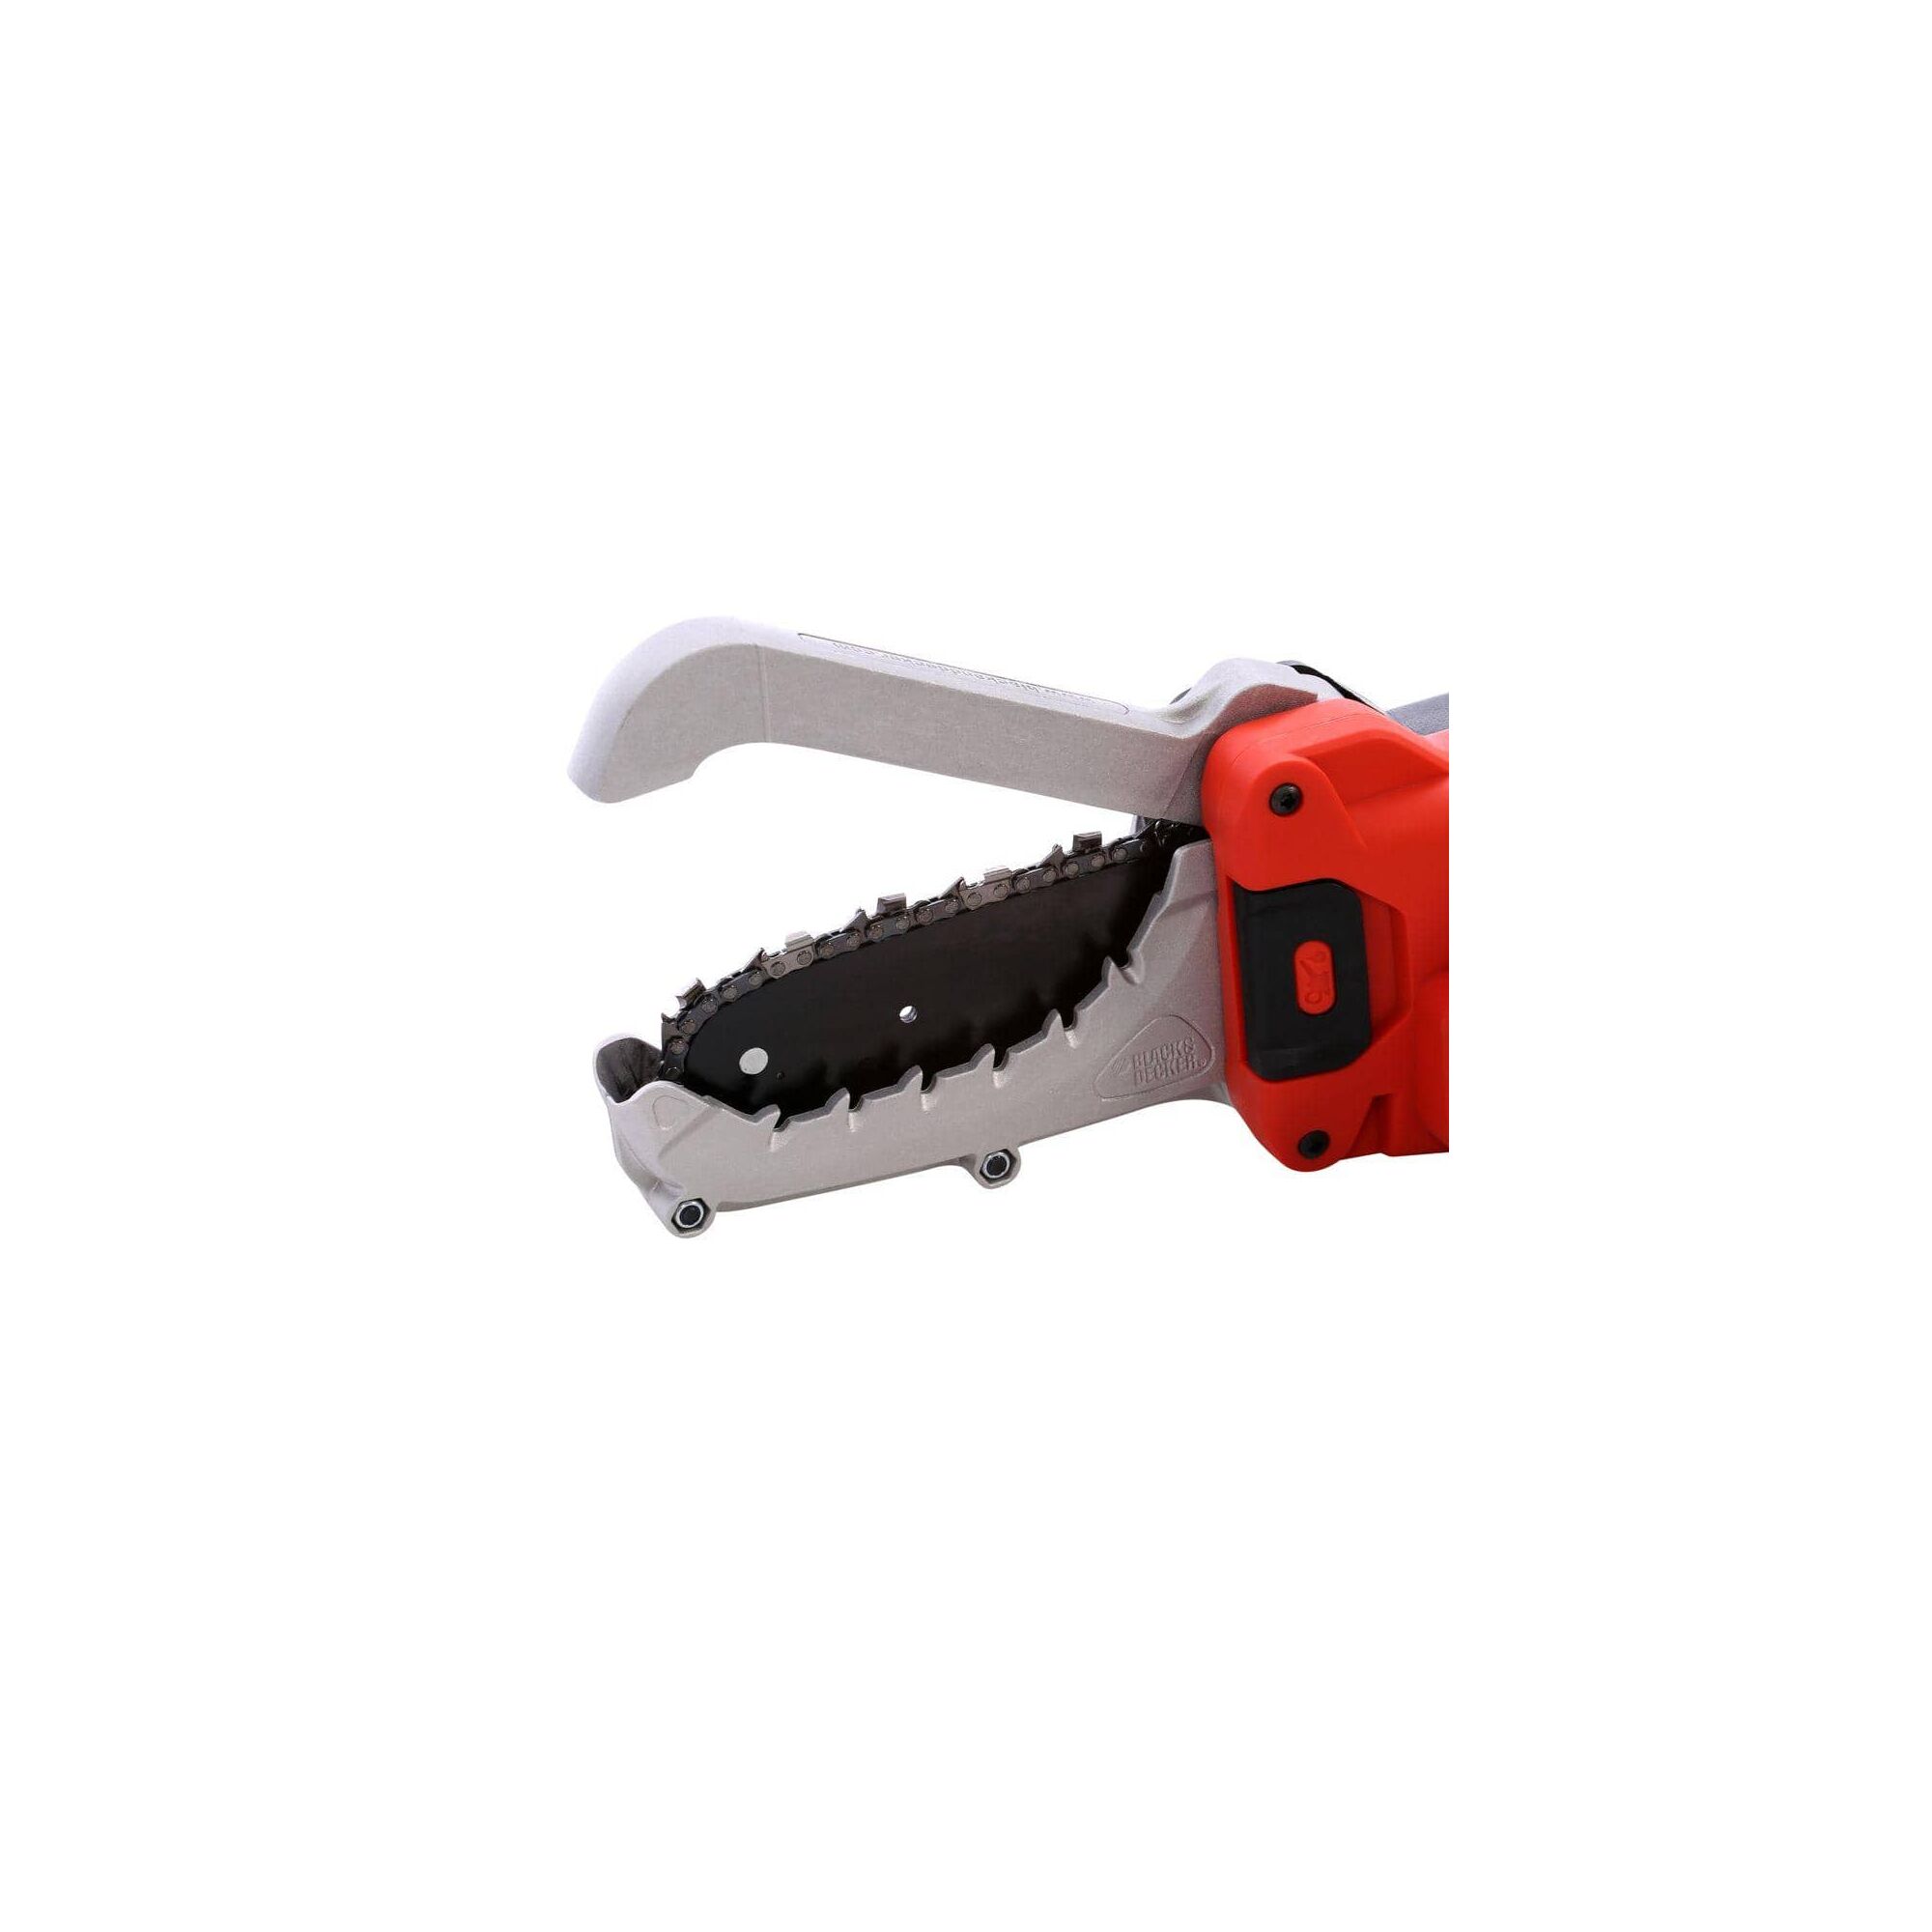 Electric Outdoor Lopper blade on white background.